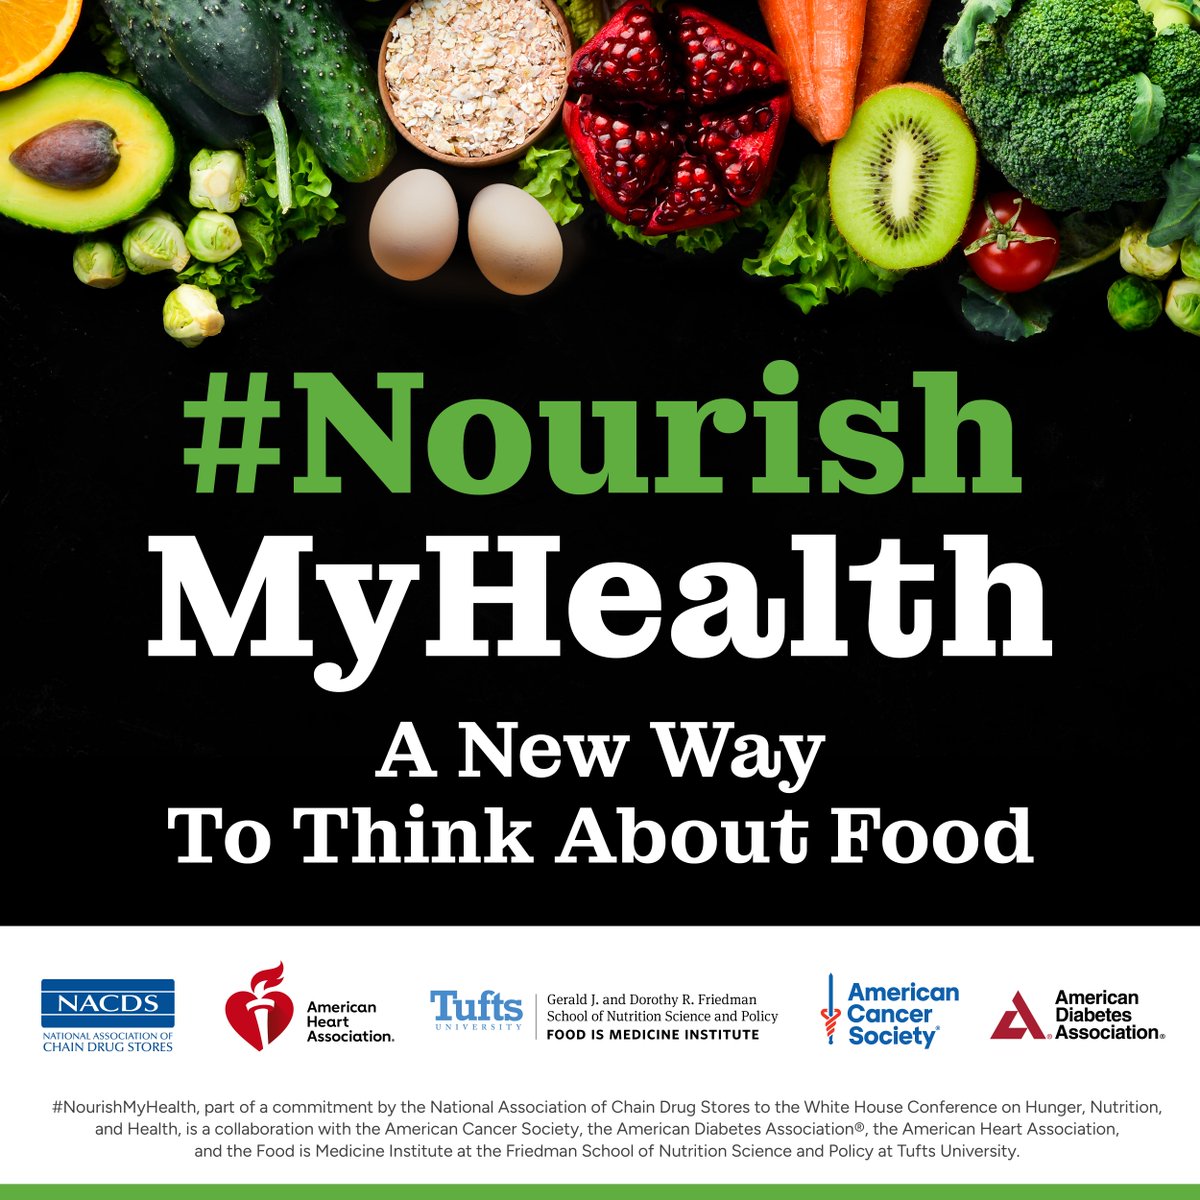 Eating more nutritious foods can help reduce the risk of diet-related #heartdisease, #diabetes, and #cancer.

@American_Heart is proud to join the #NourishMyHealth campaign.

Learn more 👉 spr.ly/6019uGAfJ

#WHConfHungerHealth